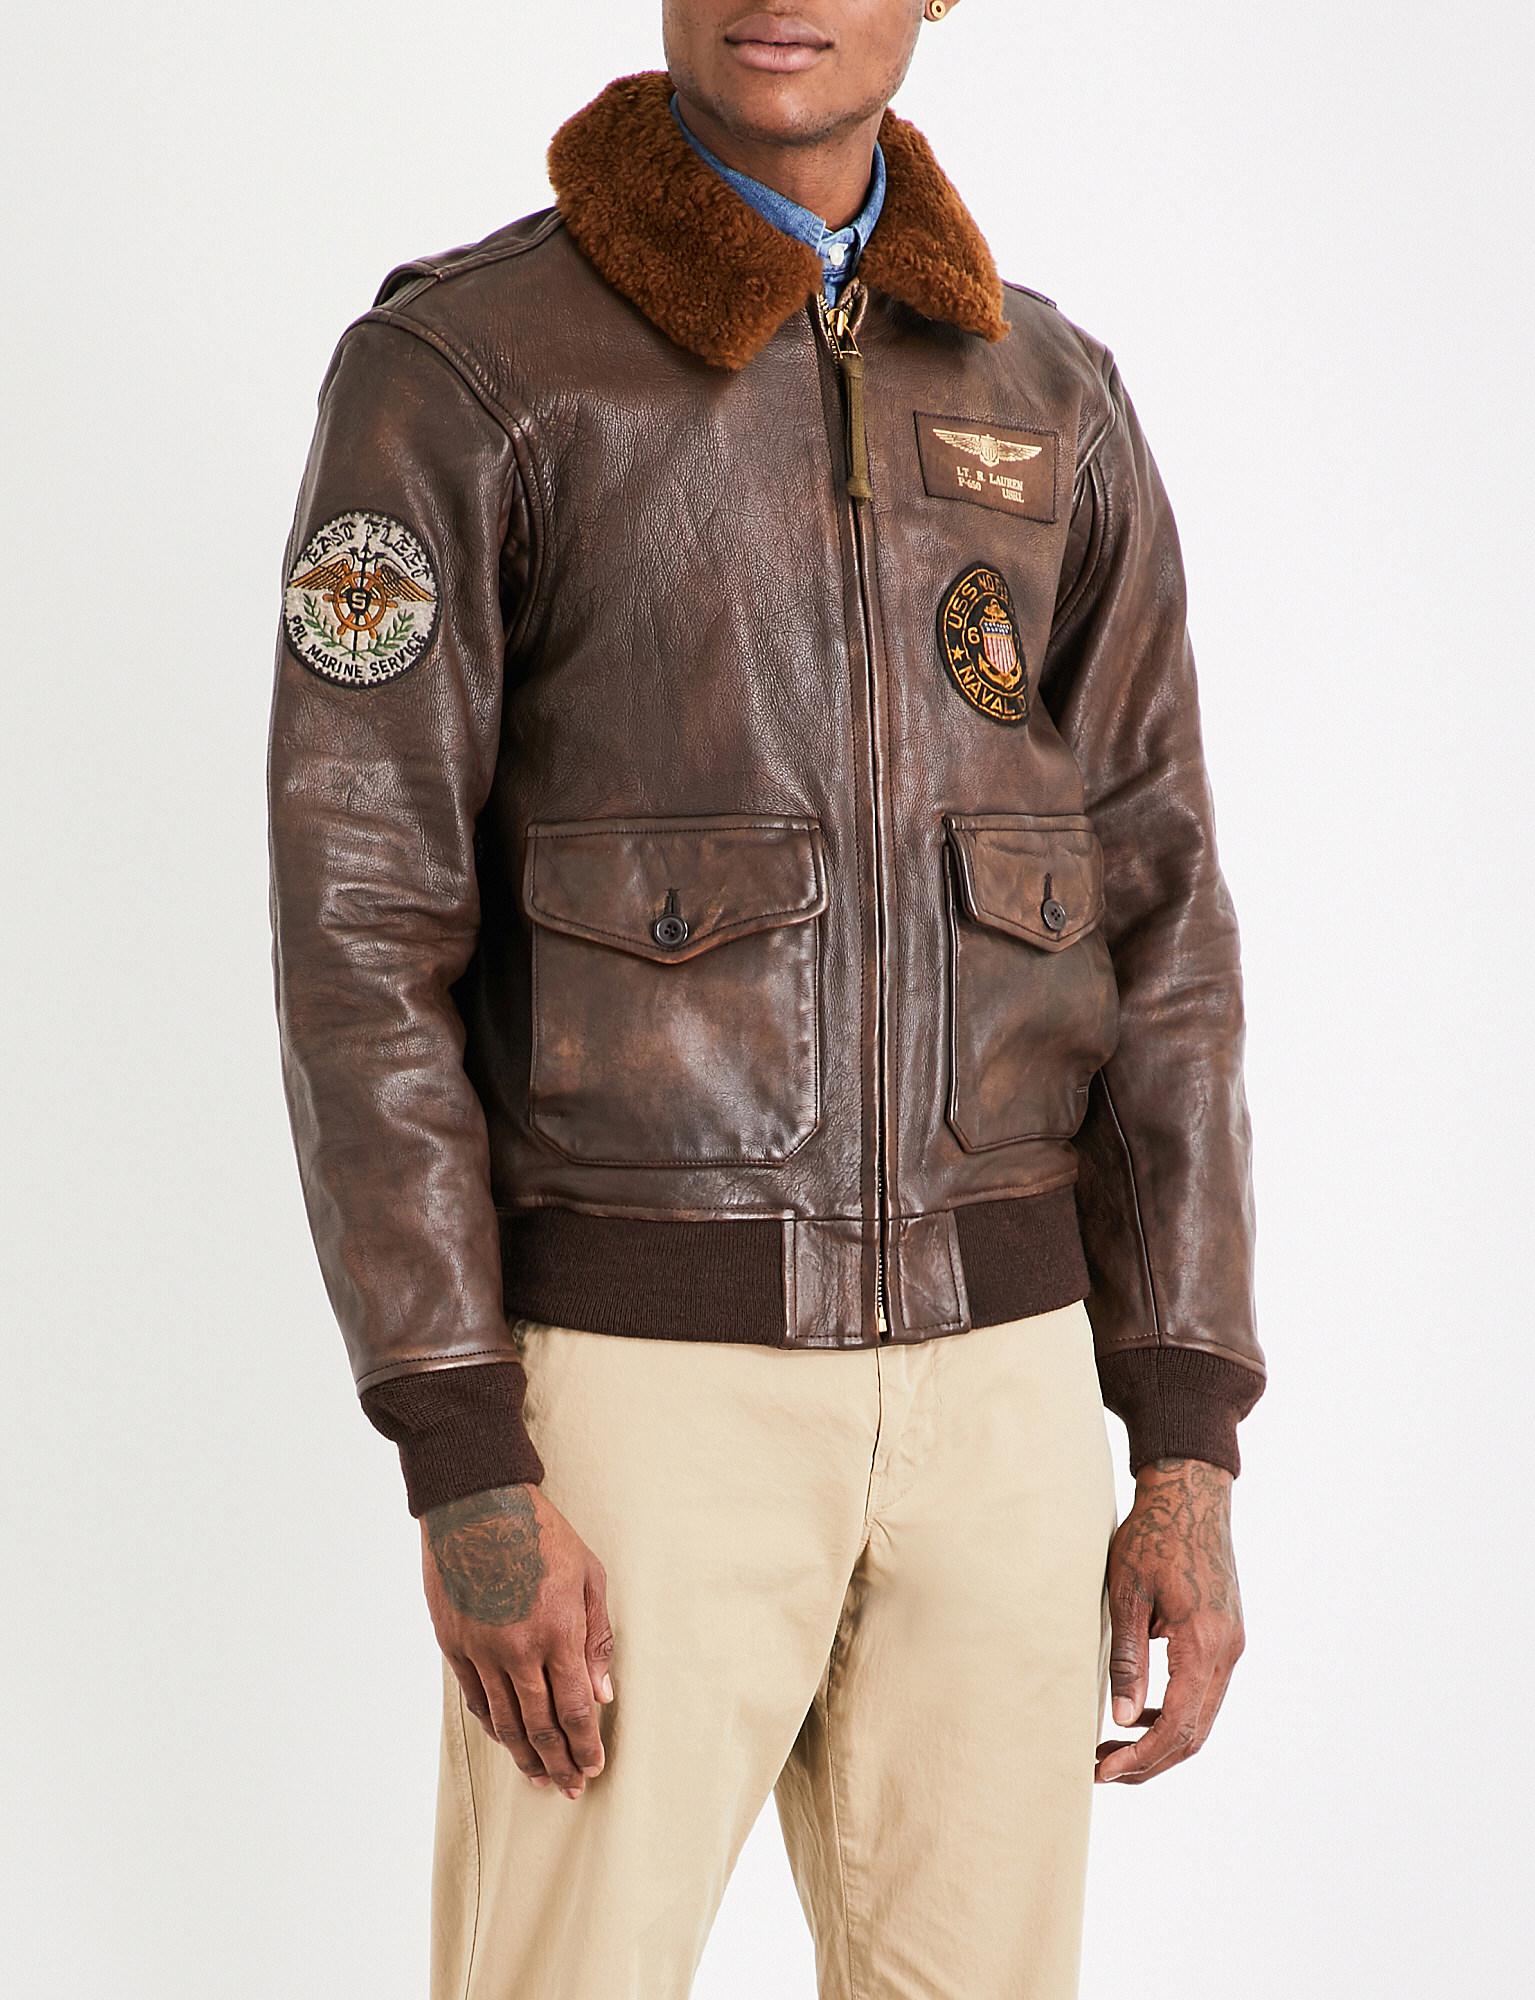 Polo Ralph Lauren G1 Leather Bomber Jacket in Brown for Men | Lyst 